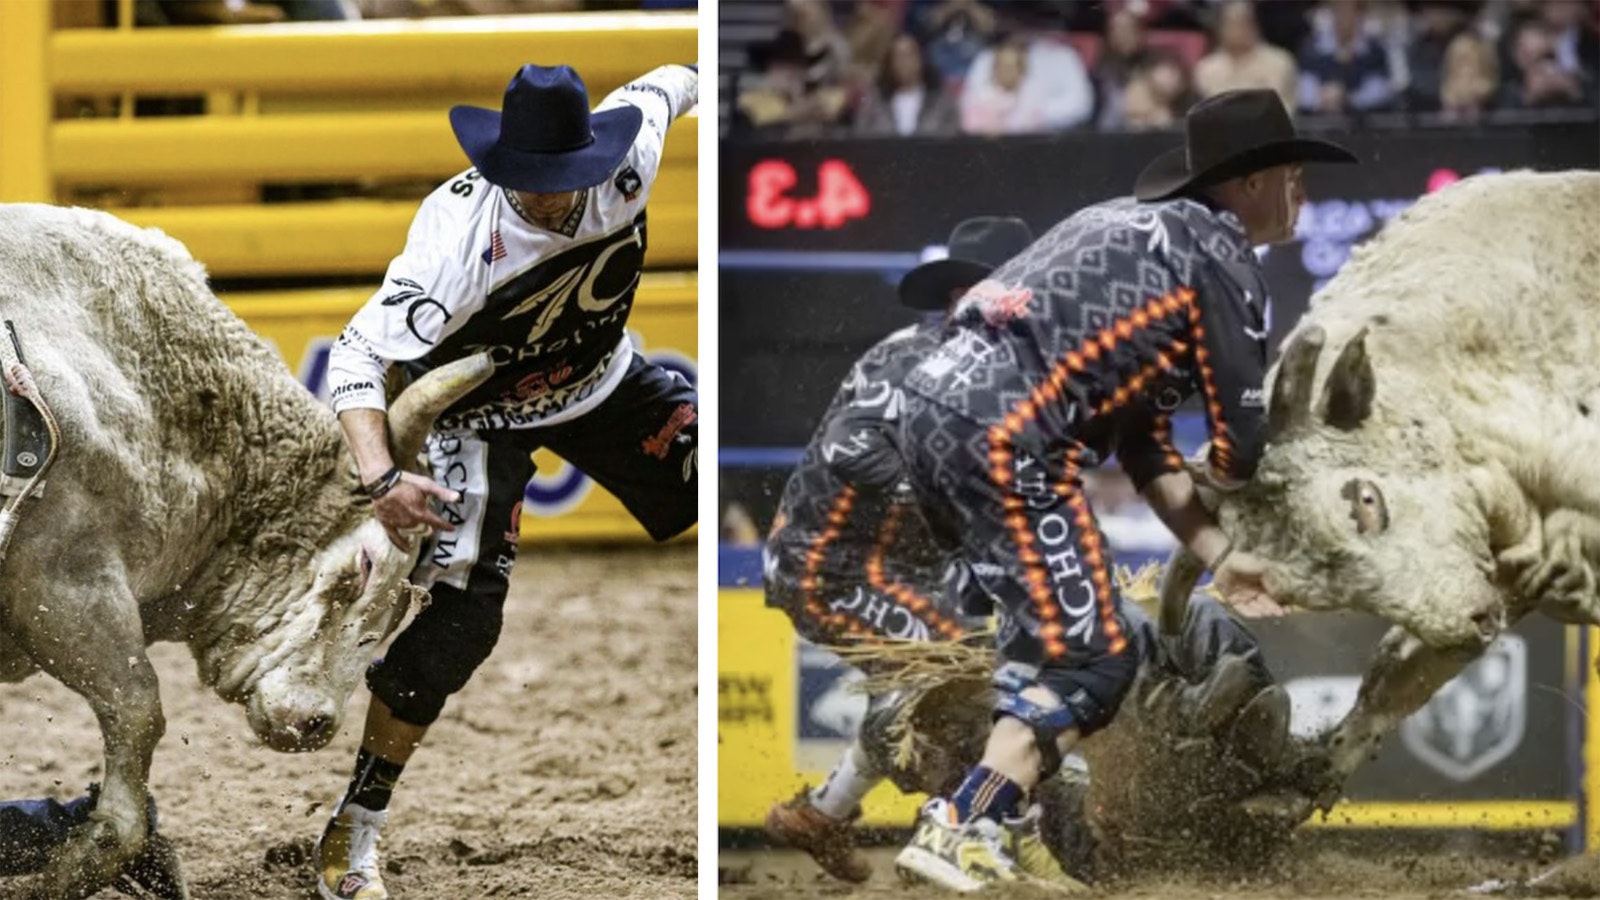 When the situation calls for it, Dusty Tuckness will get hands-on with a bull.